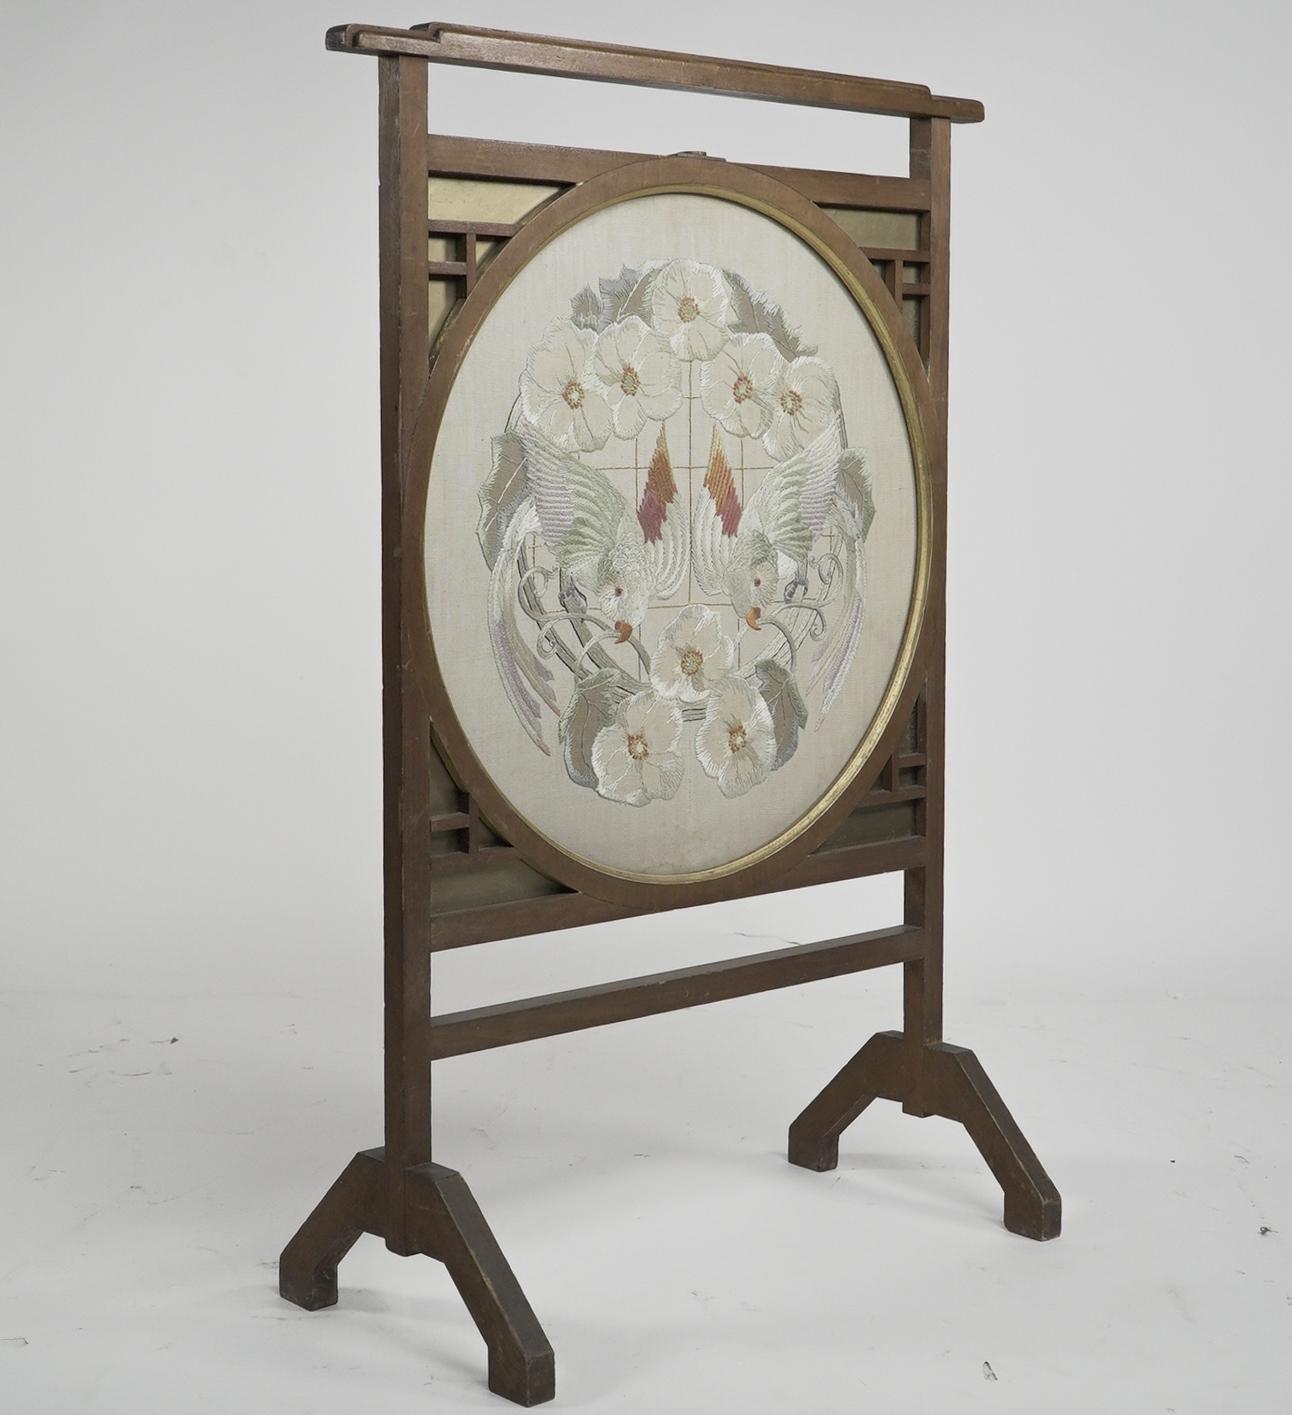 E W Godwin. In the style of. An Anglo-Japanese designed fire screen, with a stepped top rail and a Japanese silk embroidery depicting a pair of parrots or parakeets amongst floral decoration, set in a circular gilt edge frame with Japanese blind